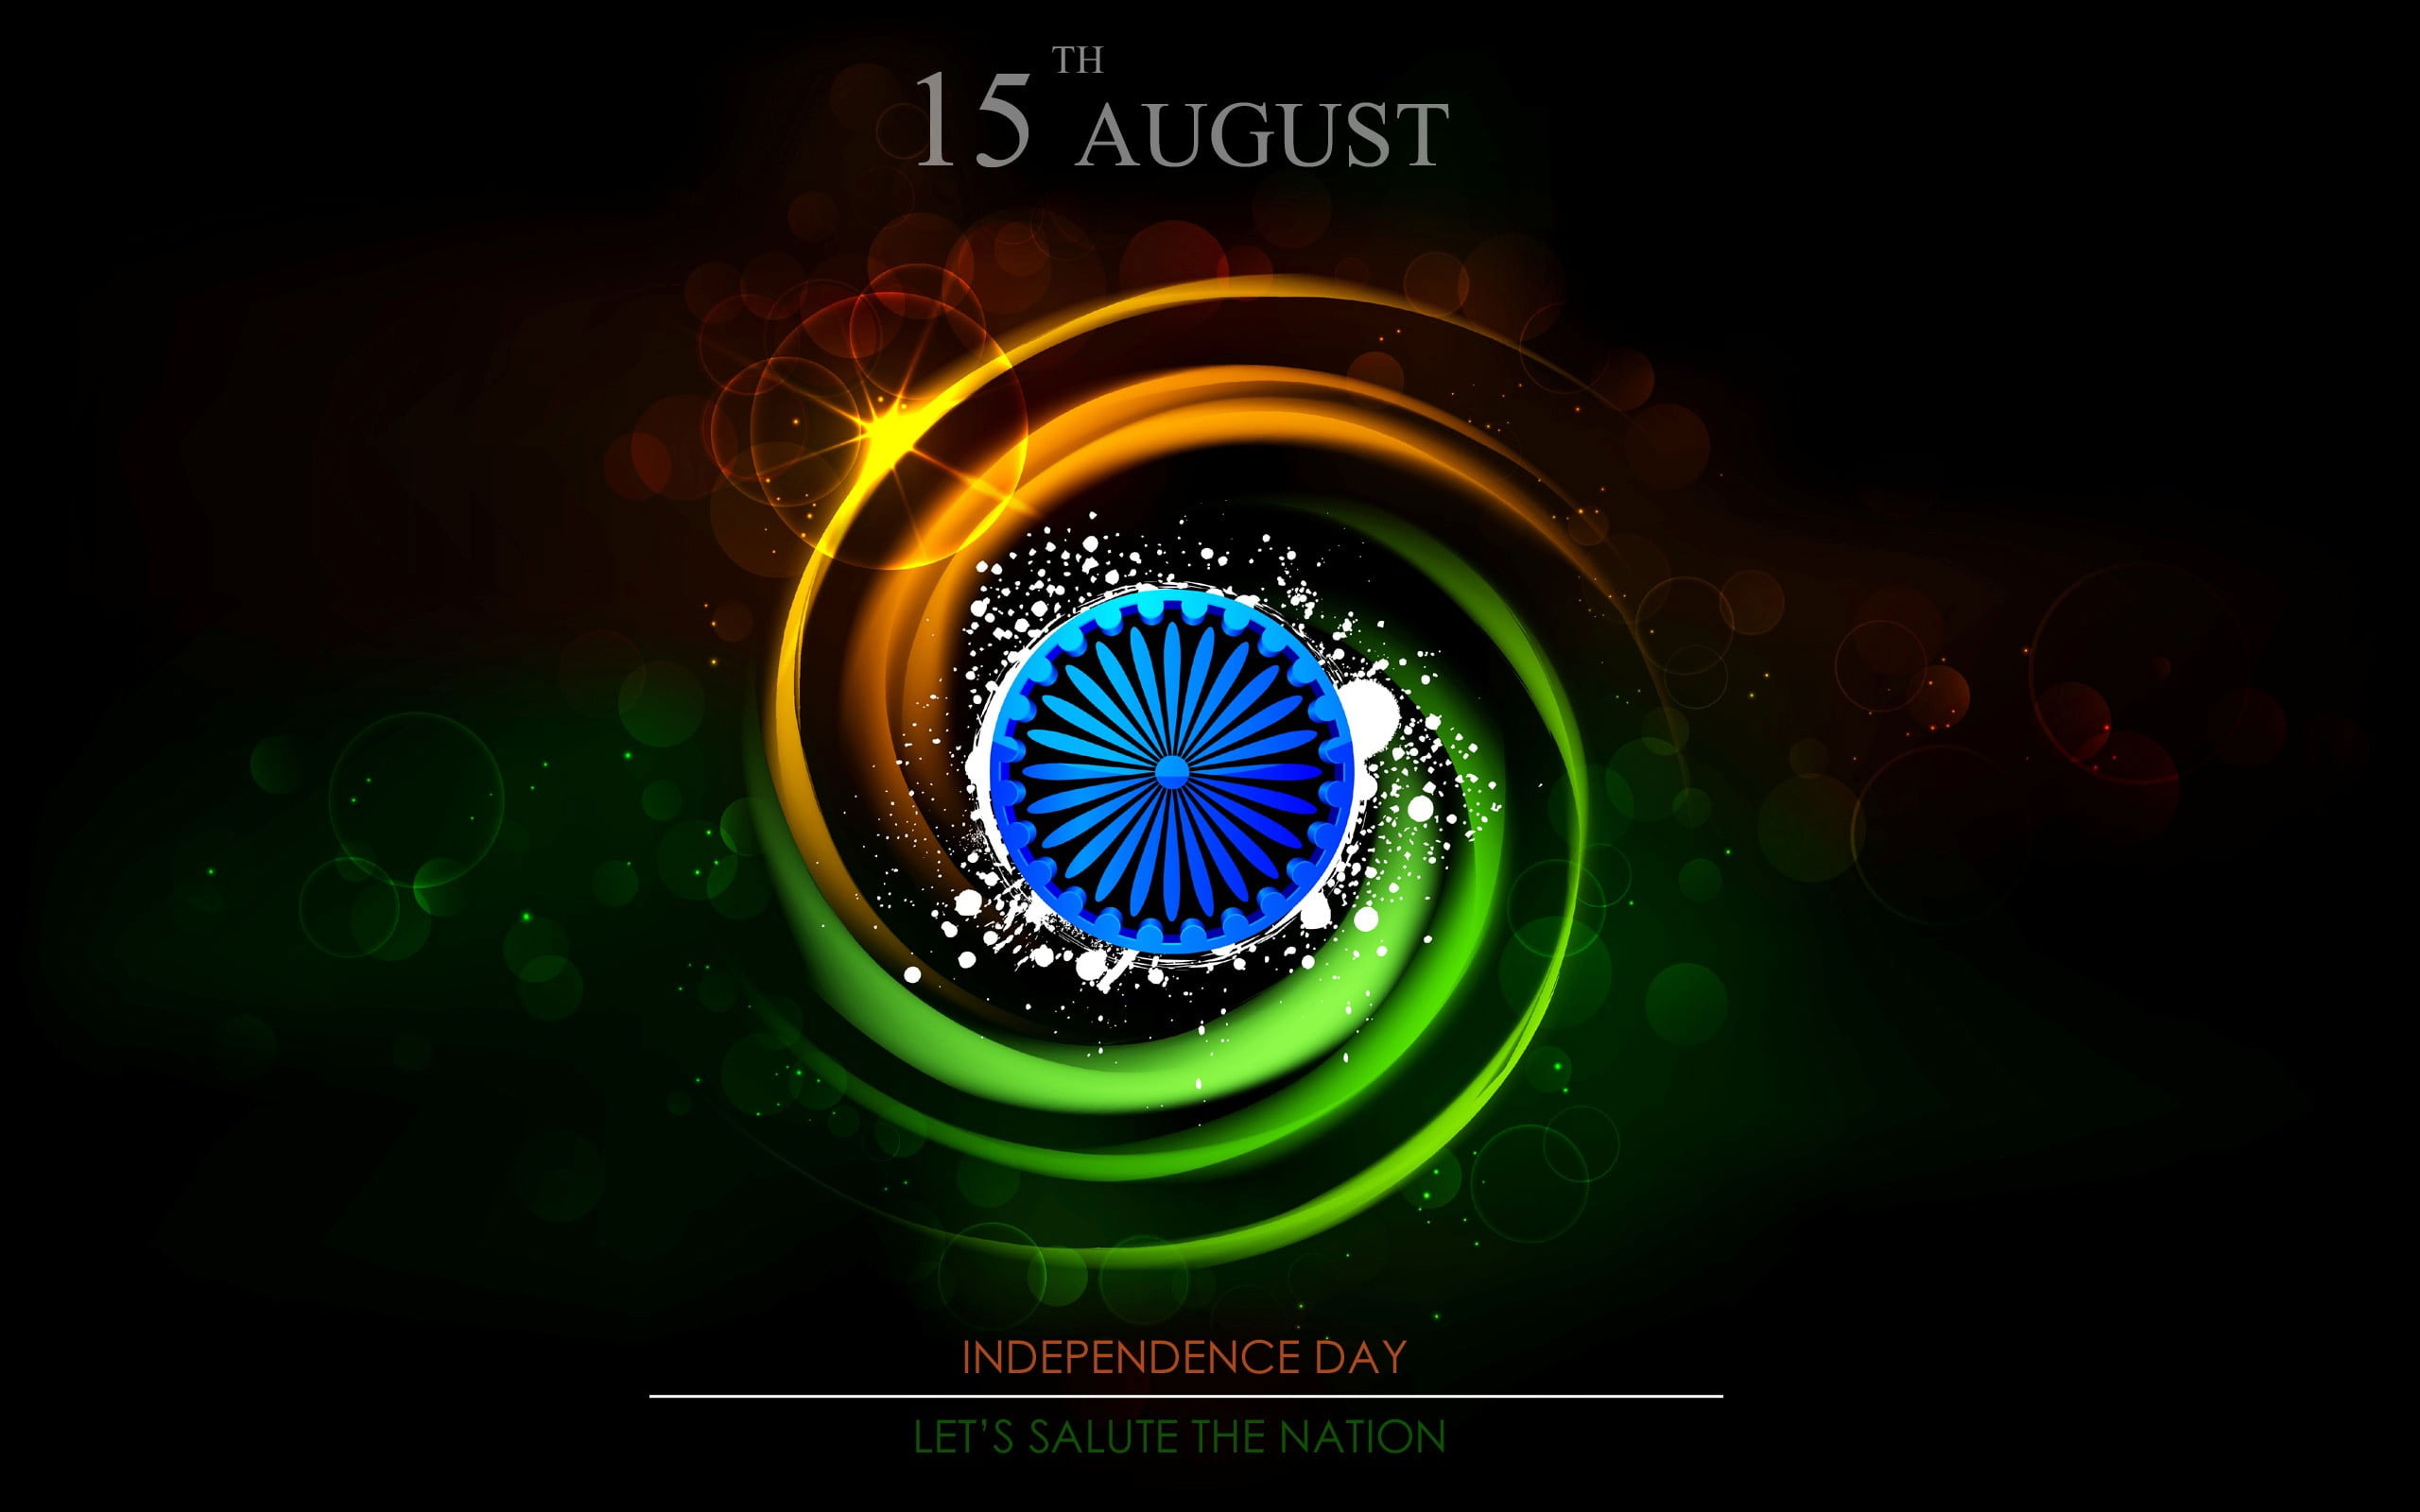 15 August Lets Salute The Nation wallpaper, Happy Diwali Independence Day illustration